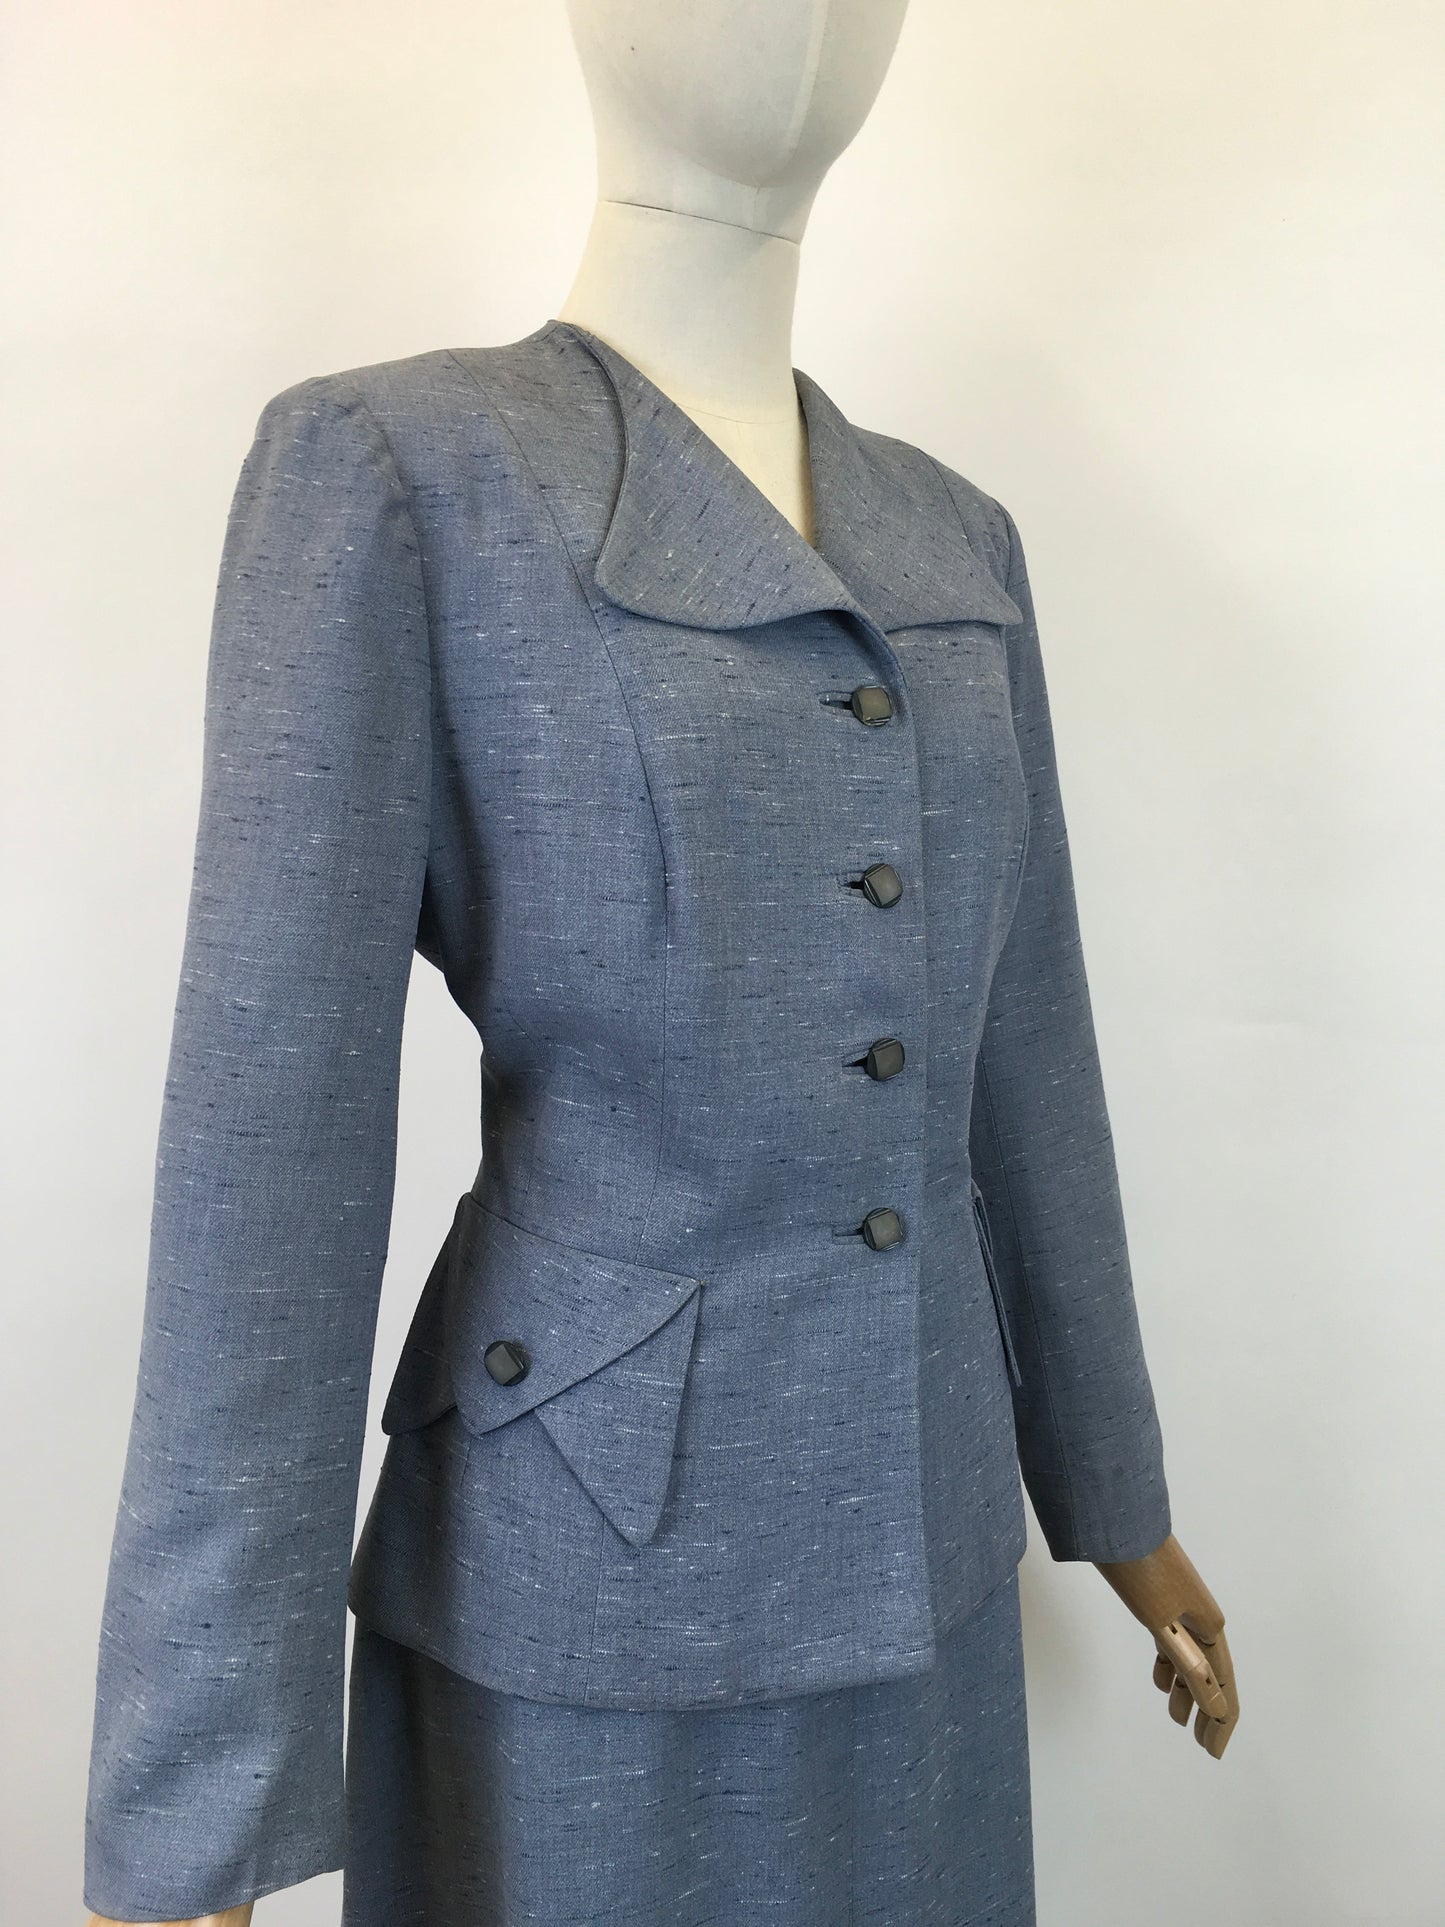 Original Late 1940’s early 1950’s Atomic Fleck 2pc Suit - In a Lovely Powdered Blue